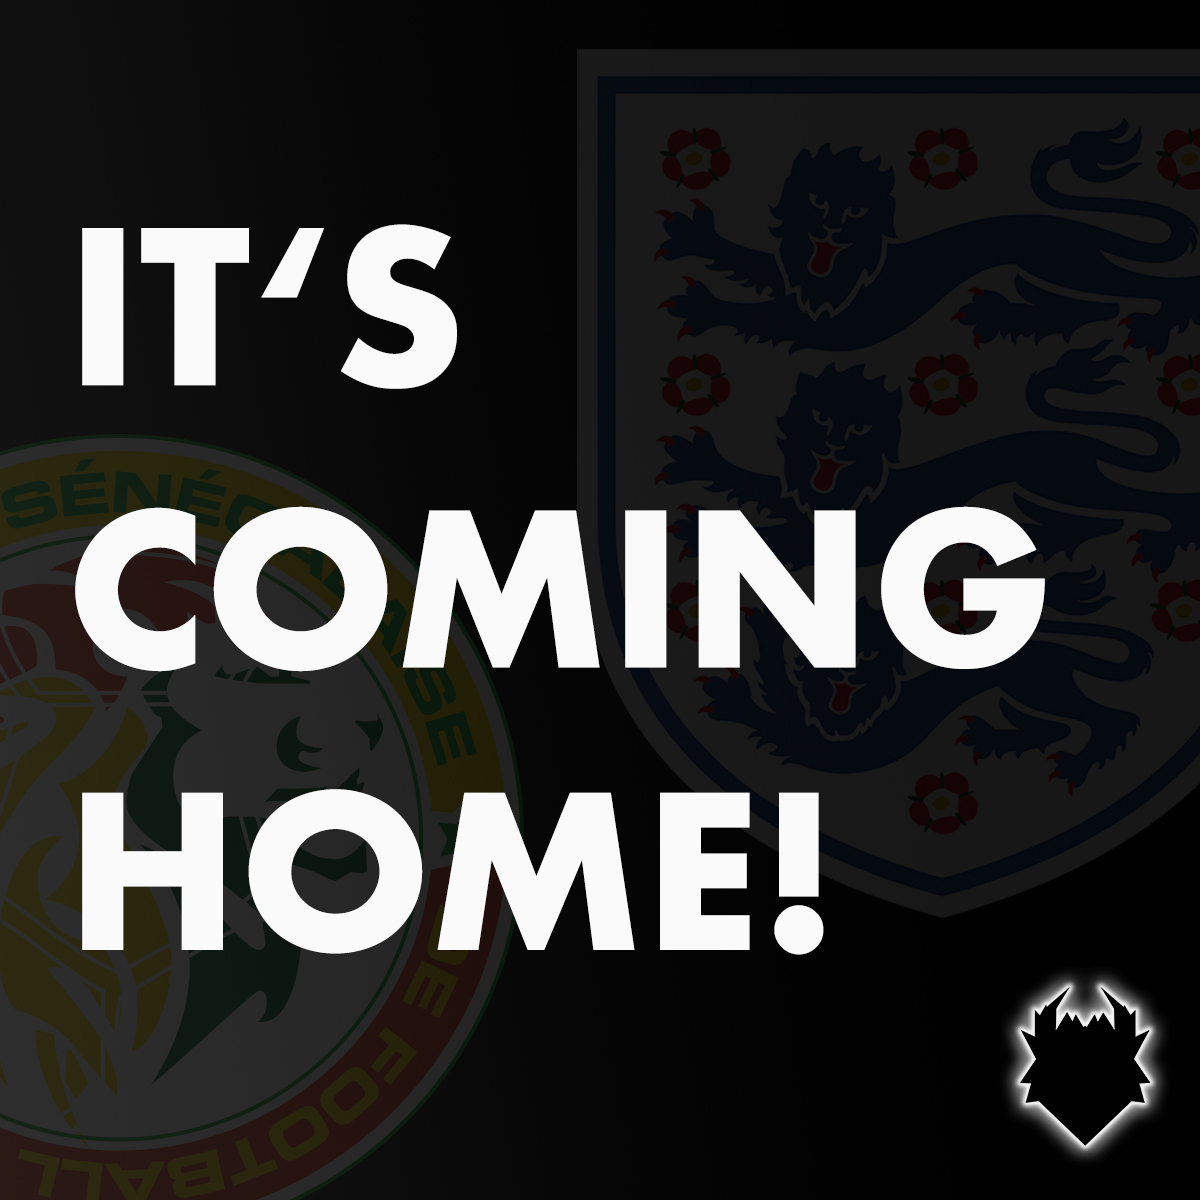 England have made it to the final 16 and face Senegal this evening! 

What do you think the score will be? 🤔
#WorldcupQatar2022 #WorldCup2022 #ENGLAND
#ItsComingHome #engvsen